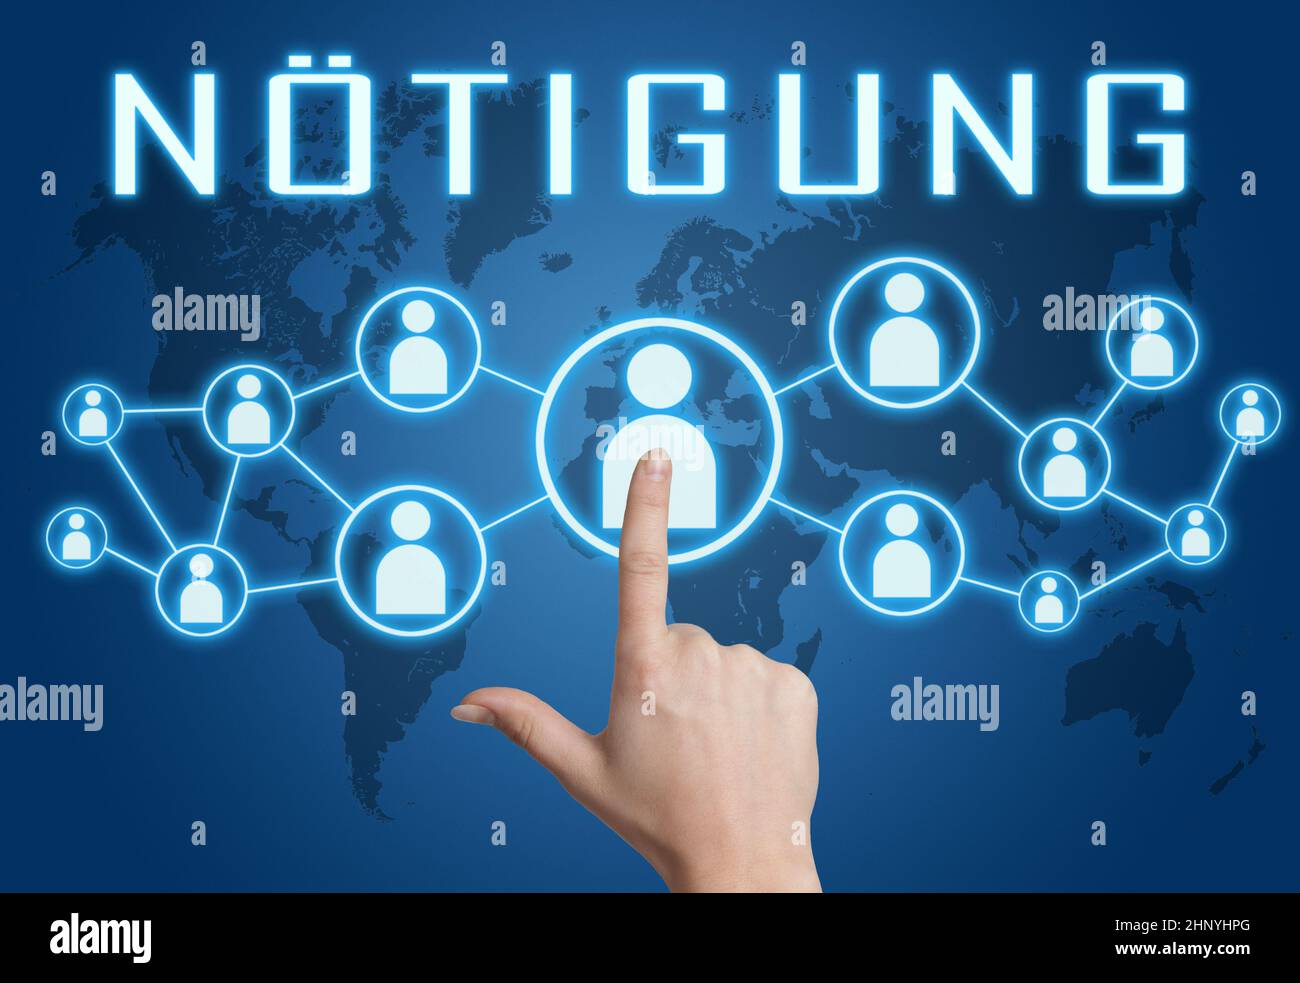 Noetigung - german word for coercion or duress - text concept with hand pressing social icons on blue world map background. Stock Photo